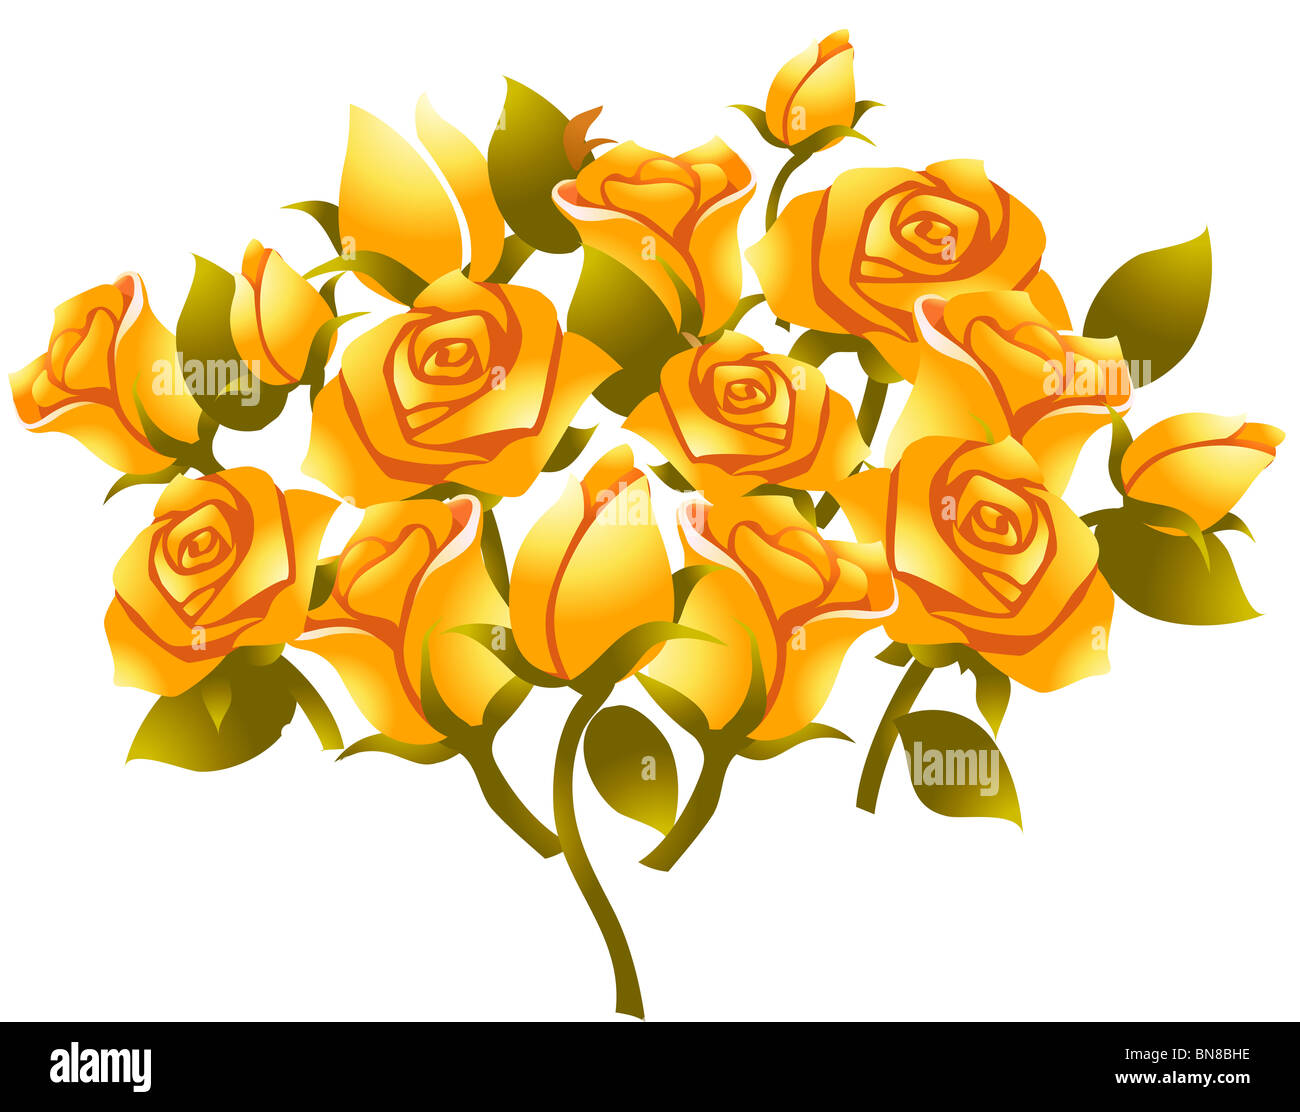 illustration drawing of yellow rose flower in white